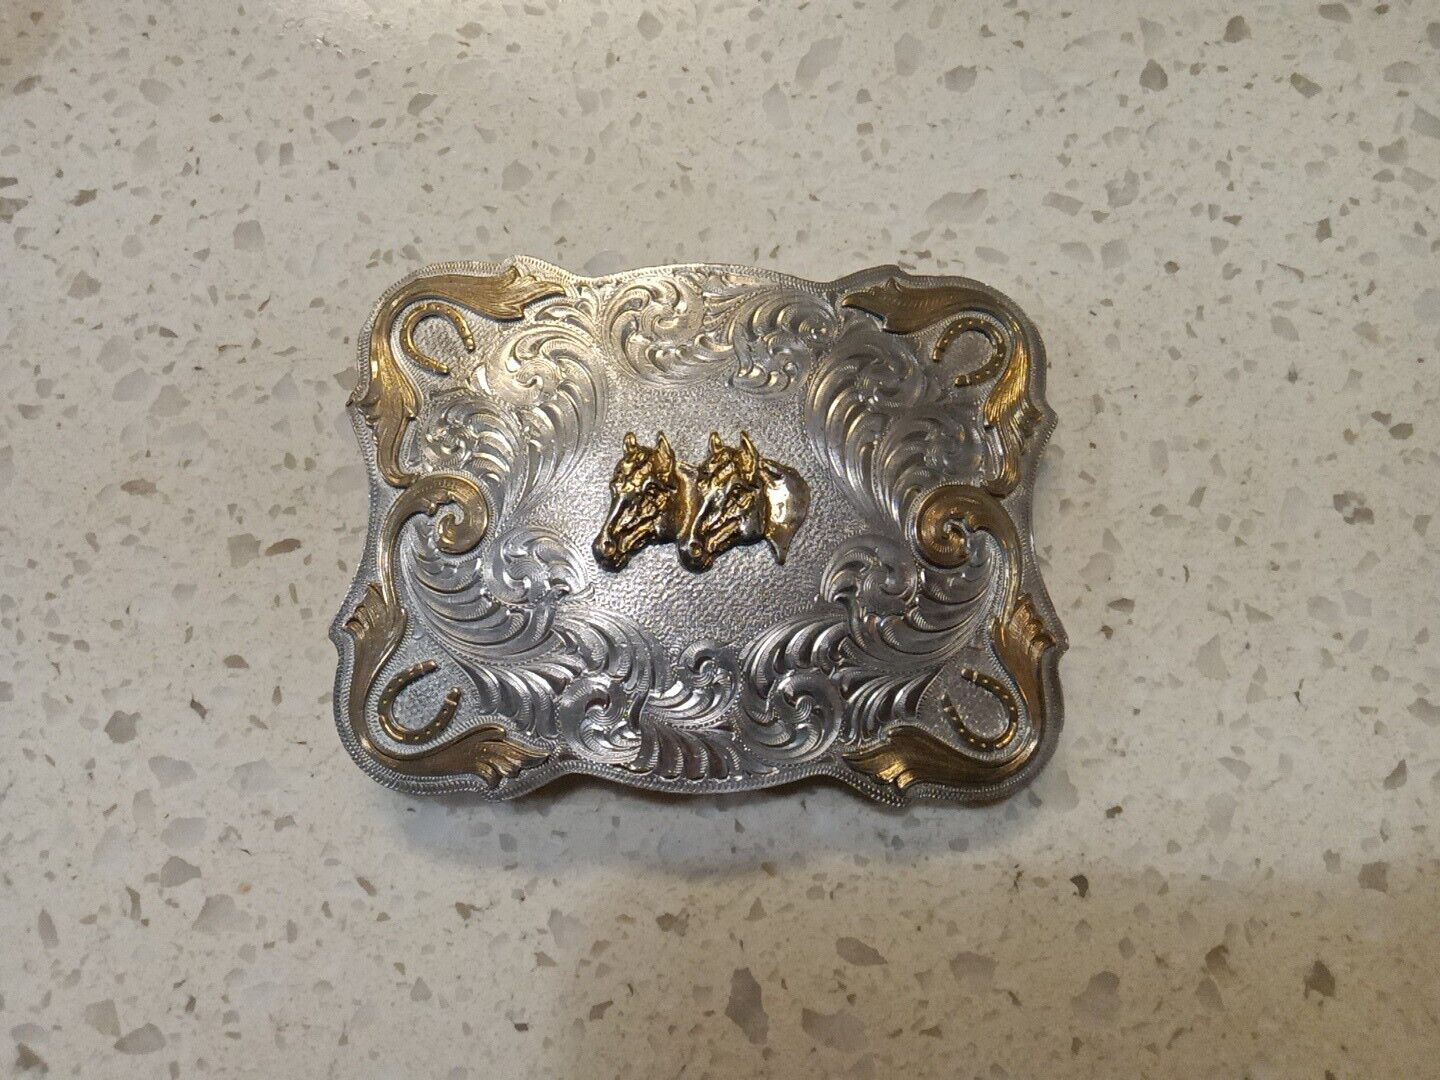 Montana Silversmith Gold Horse Belt Buckle Silver Plated Columbus Mont.